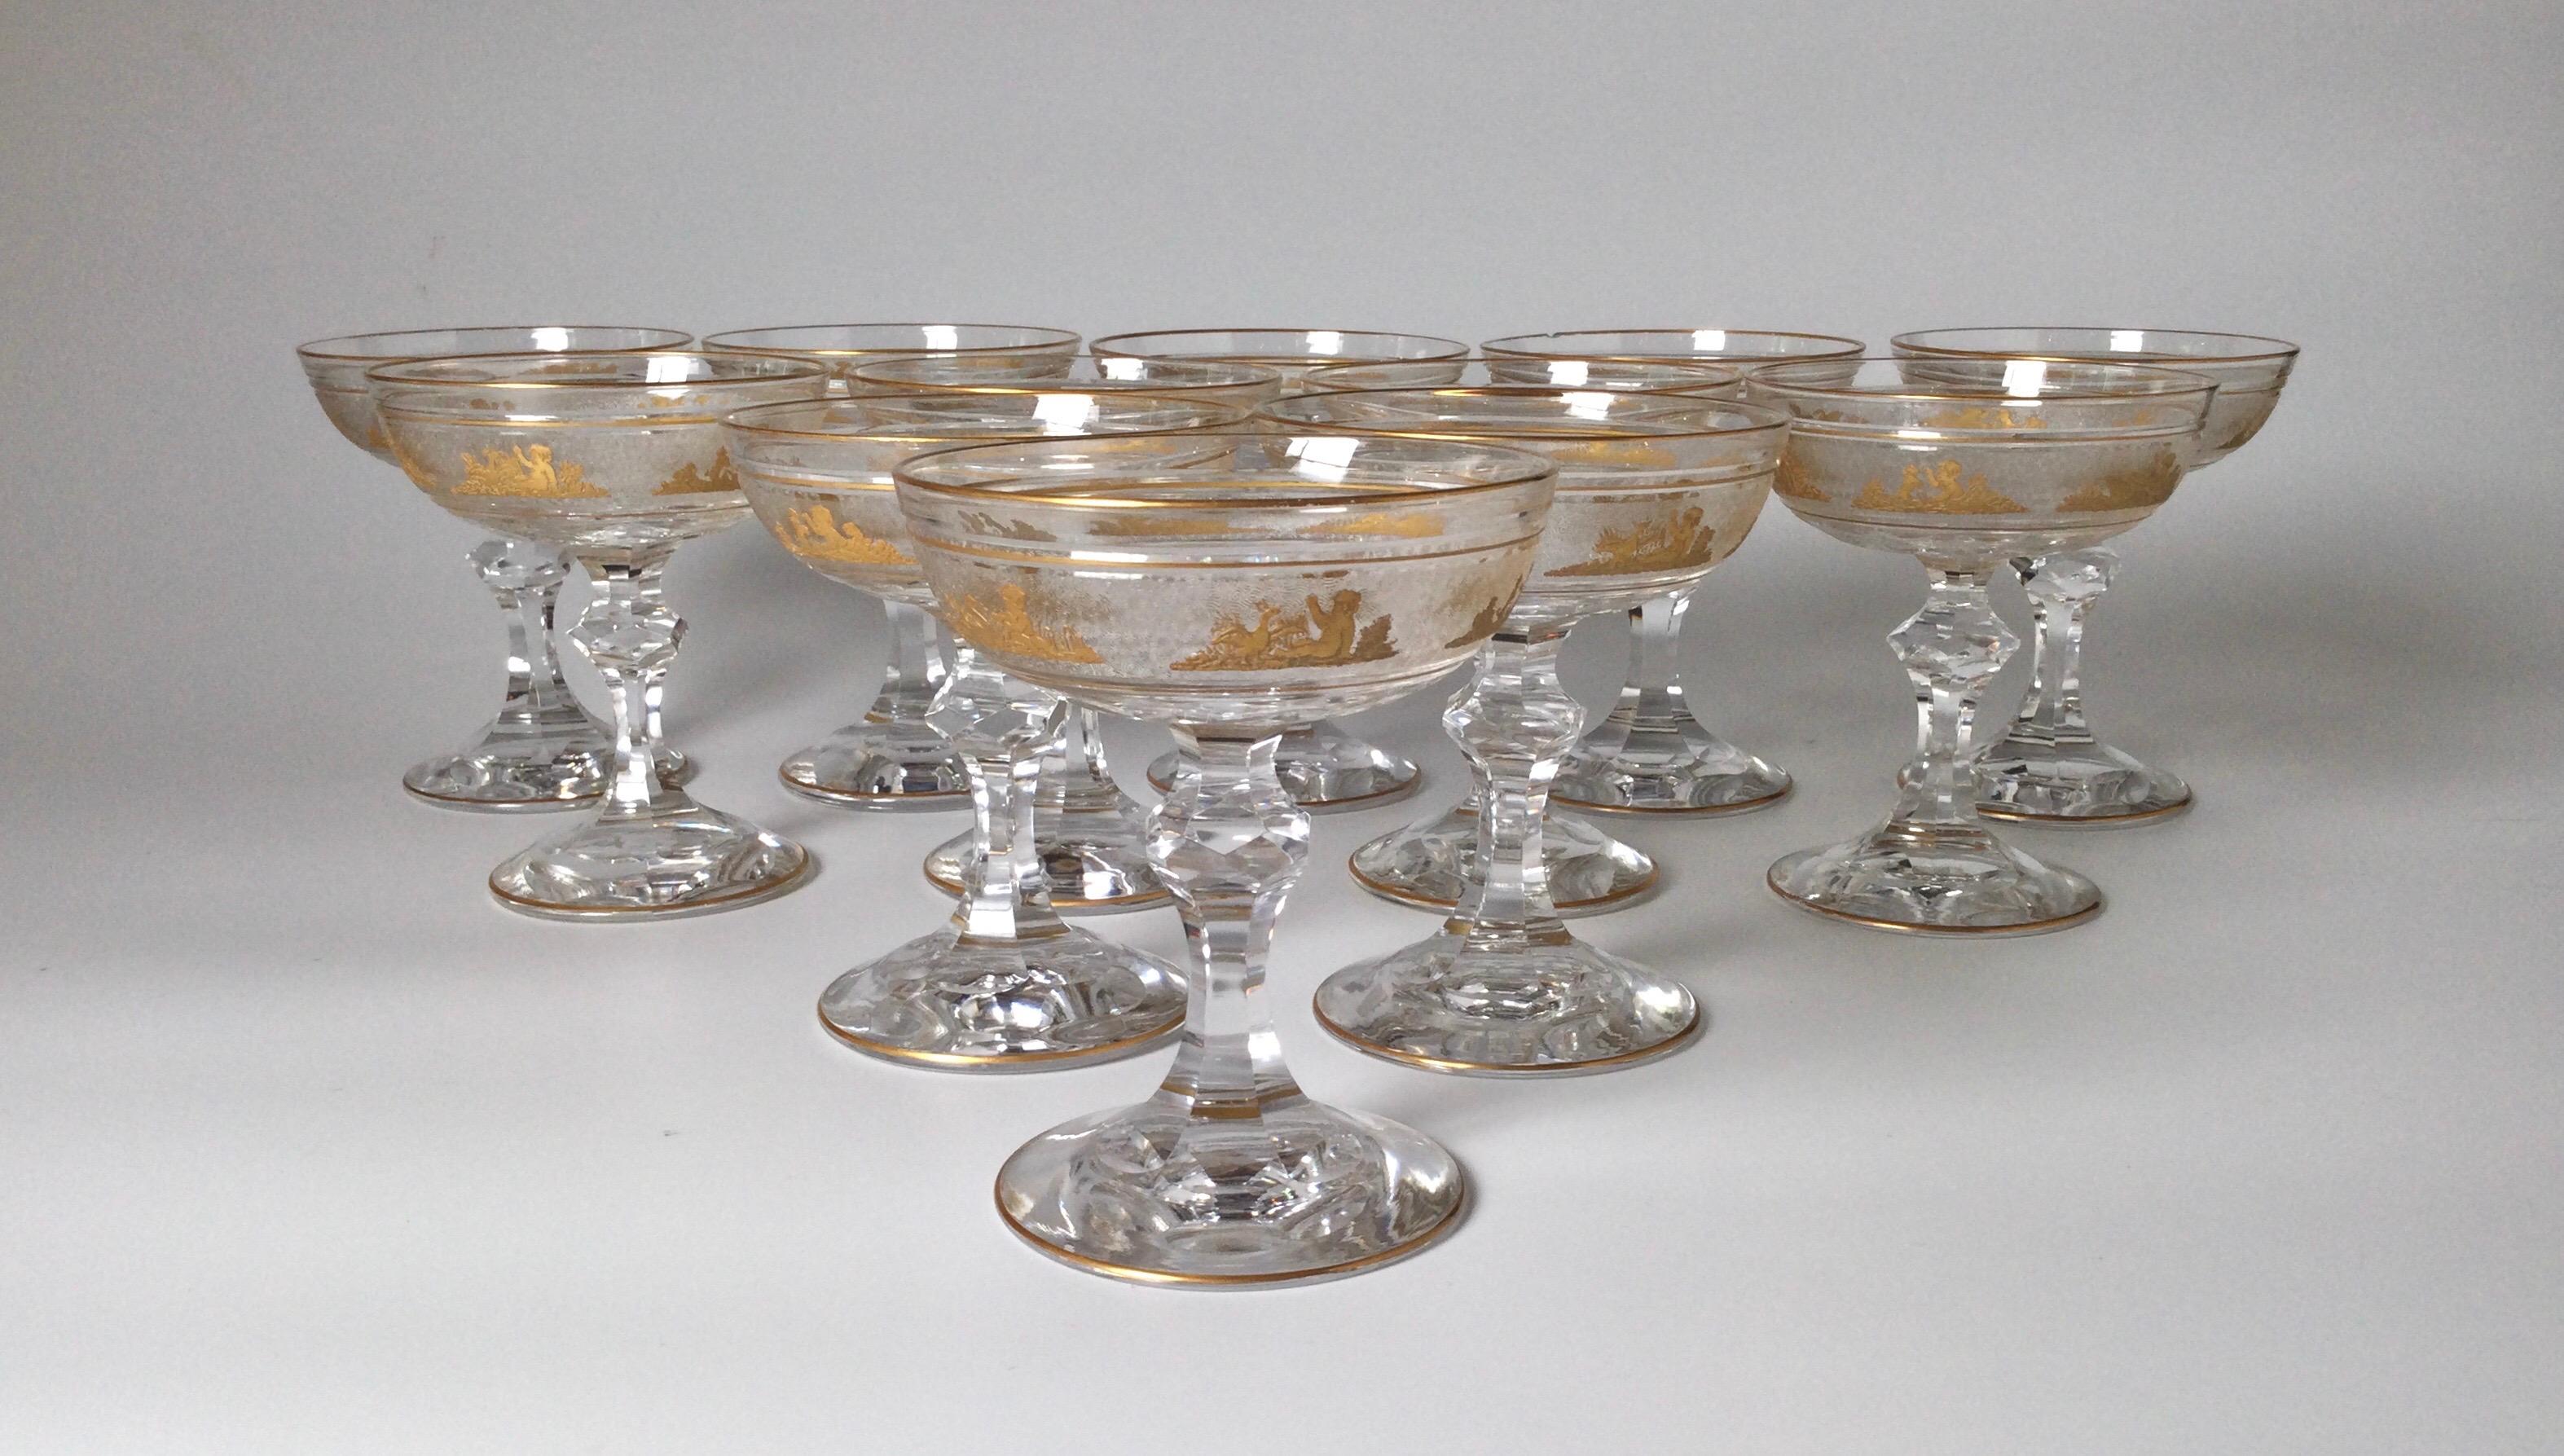    A magnificent set of 12 champagne glasses made by Val St. Lambert. Each one is handblown, panel cut bowl with cameo cut frieze of Roman figures embellished with gold leaf. This pattern is one of Val St. Lambert's finest and presents an opulent